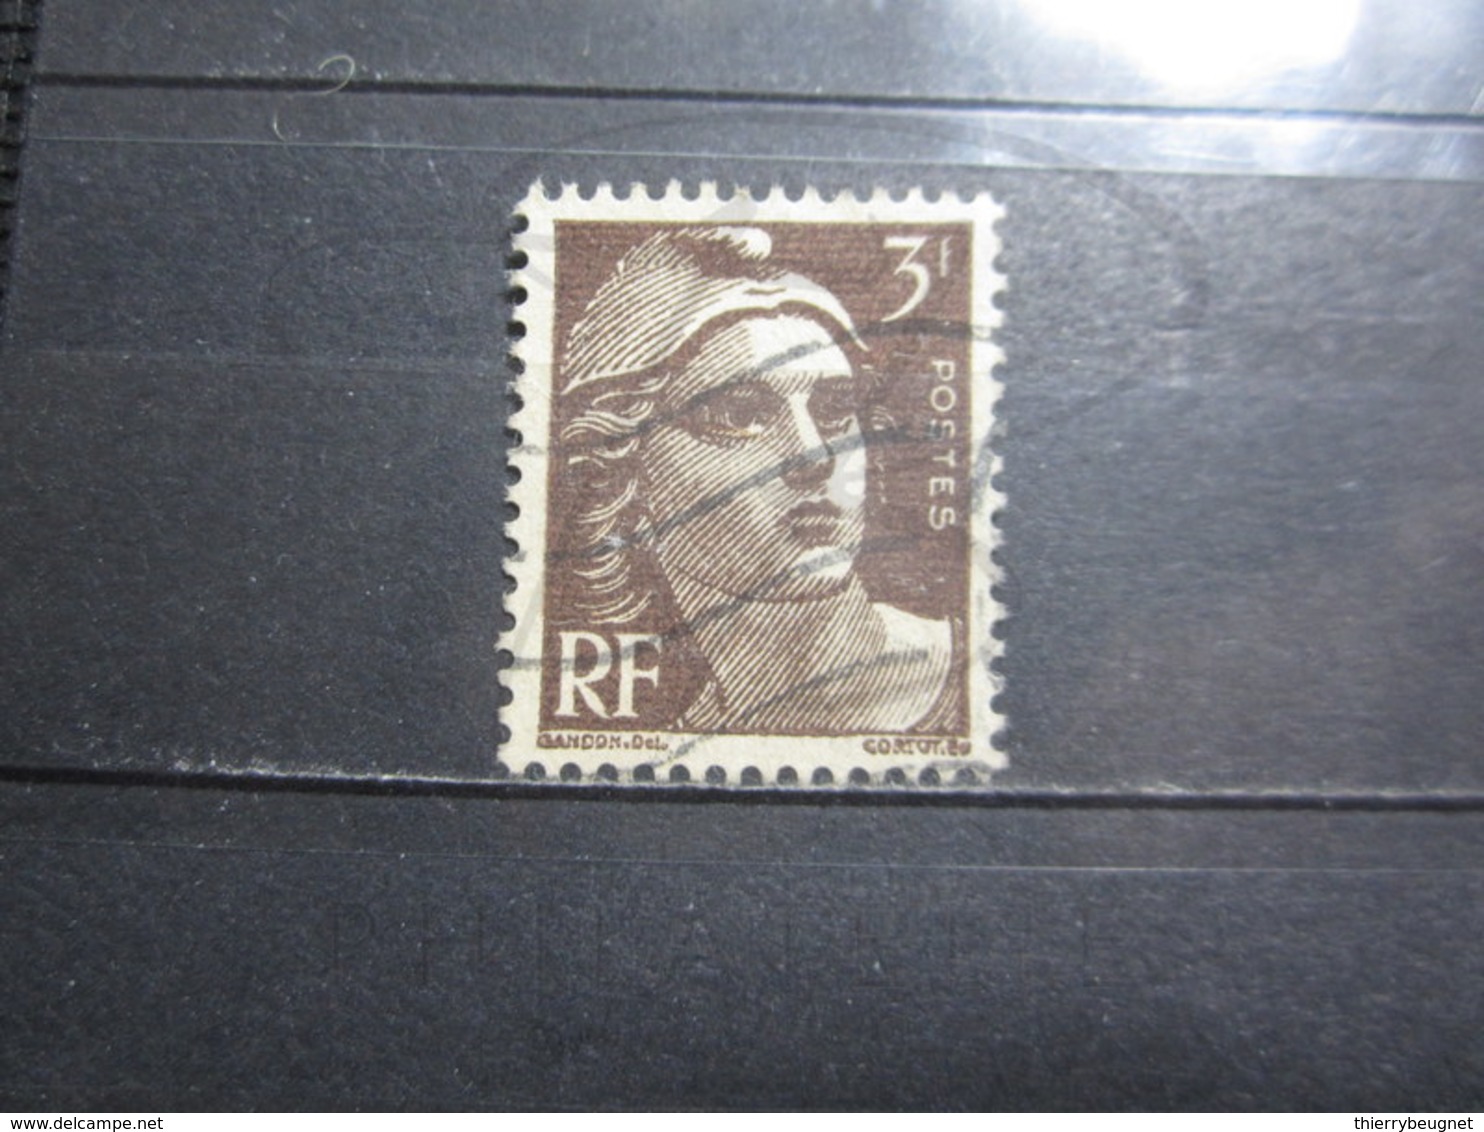 VEND BEAU TIMBRE FRANCE N° 715 , FOND LIGNE !!! (f) - Used Stamps